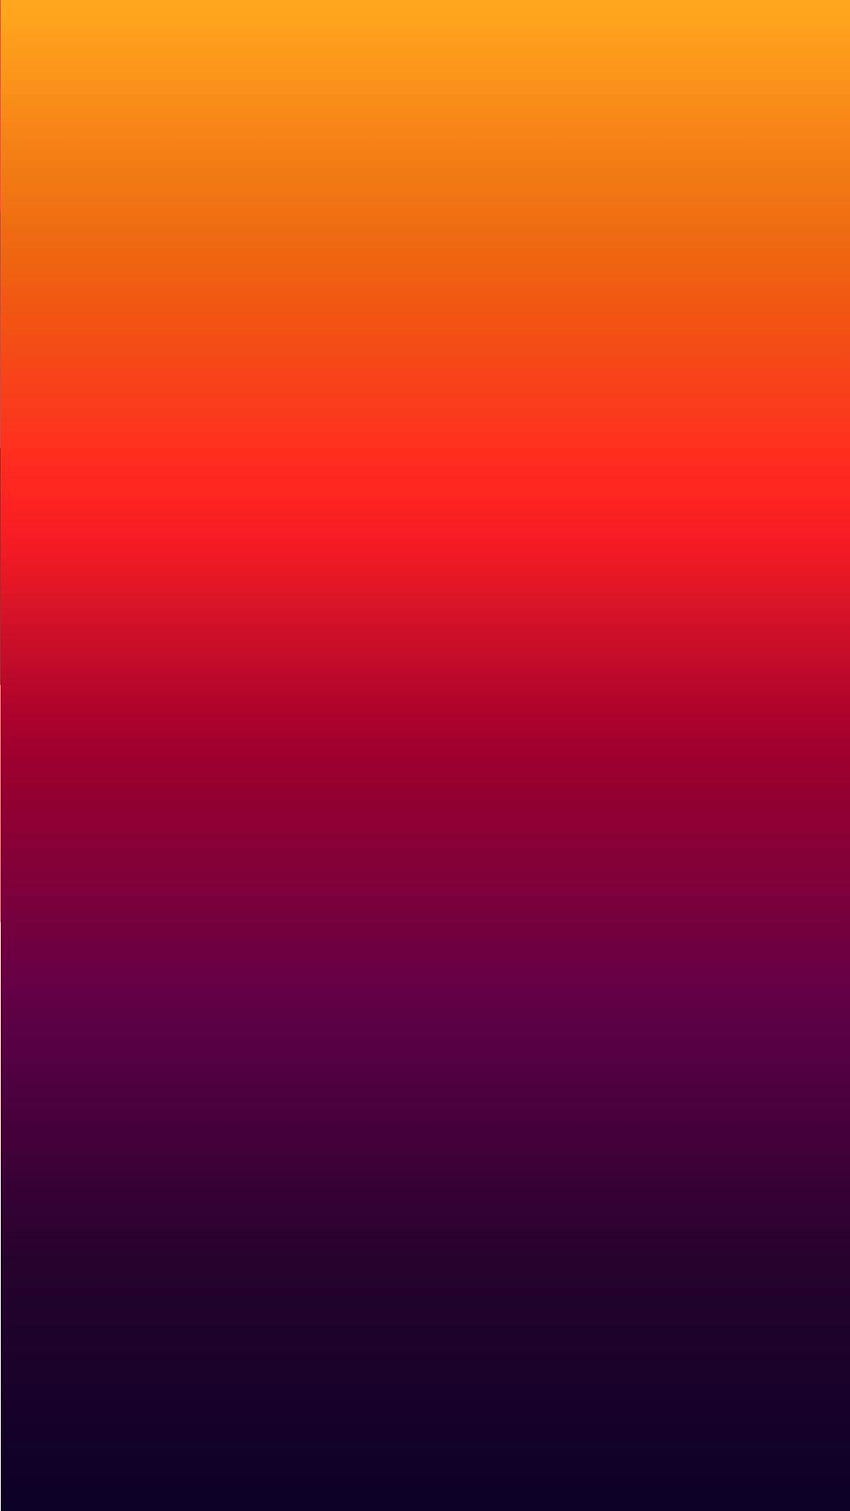 1366x768px, 720P Free download | Sunset Gradient, gradients HD phone ...